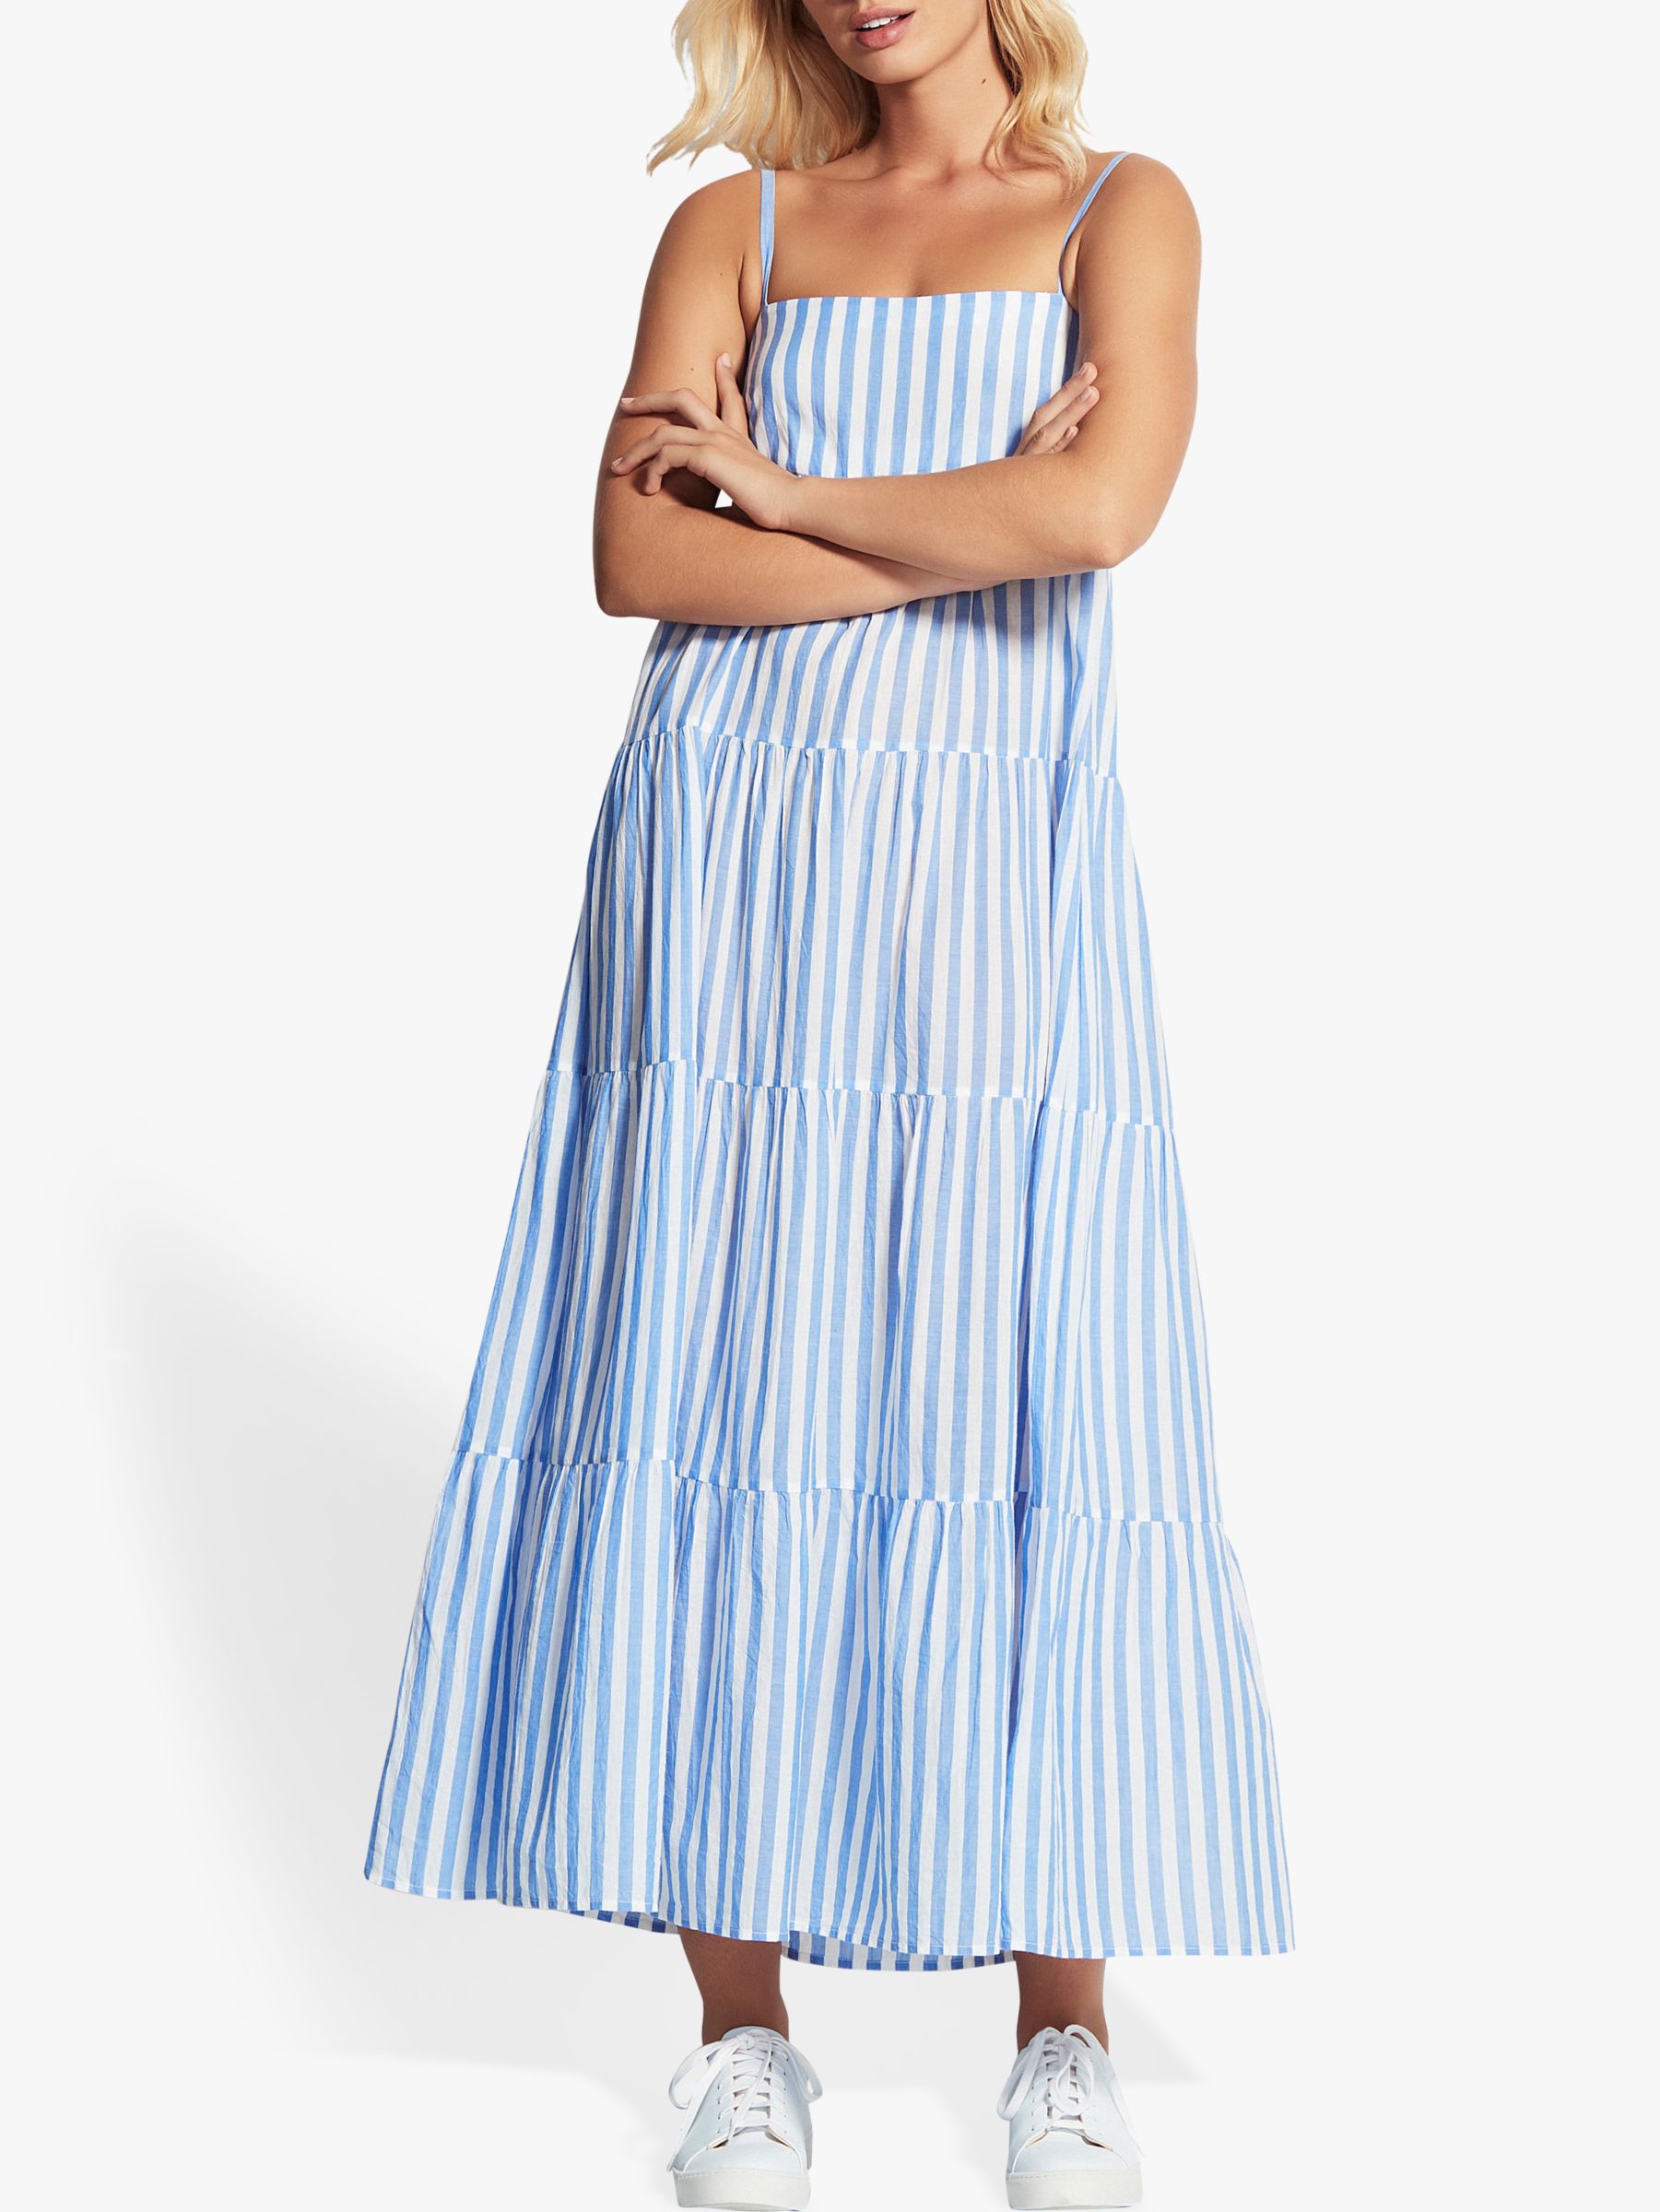 Seafolly Stripe Tiered Dress, Chambray